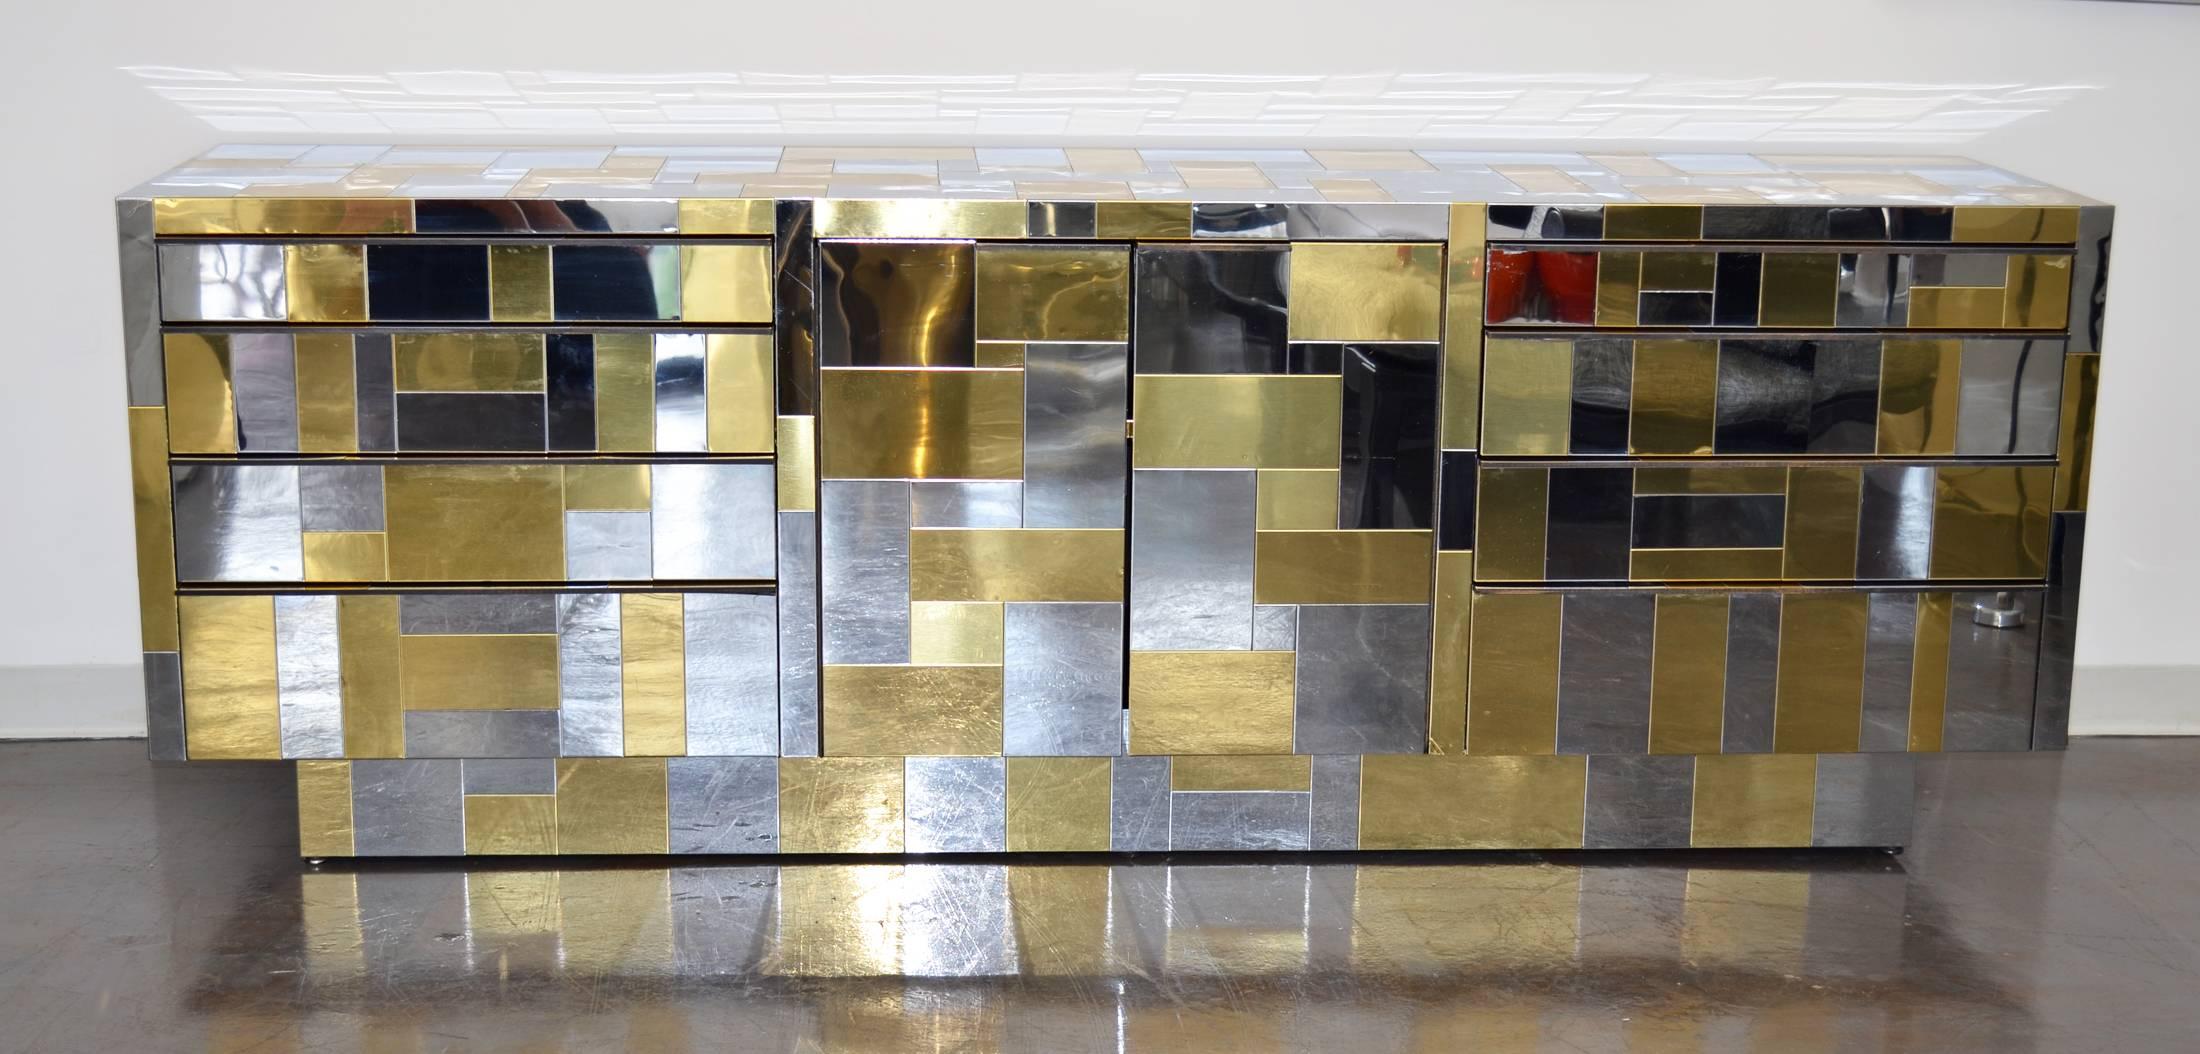 Cityscape chrome and brass chest of drawers, cabinet or credenza designed by Paul Evans for Directional Furniture circa 1970's. Center barn doors conceal shelf, flanked on either side by eight varying-size drawers. A useful, surprisingly playful